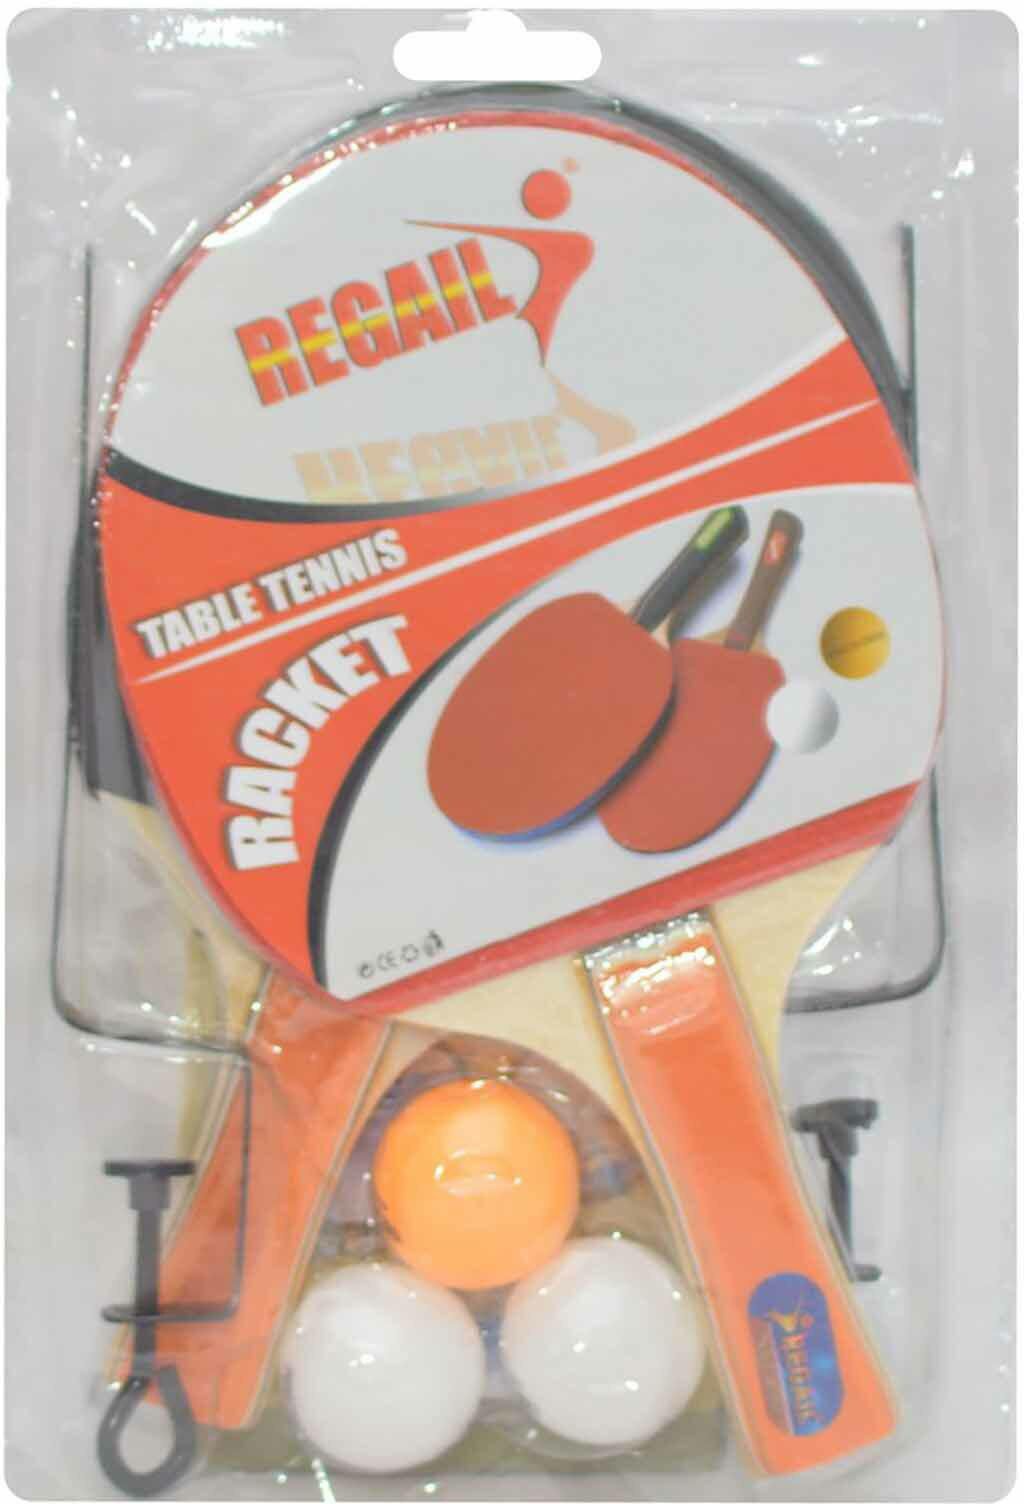 Ping Pong Paddle With 3 Balls And Metal Mesh Holder